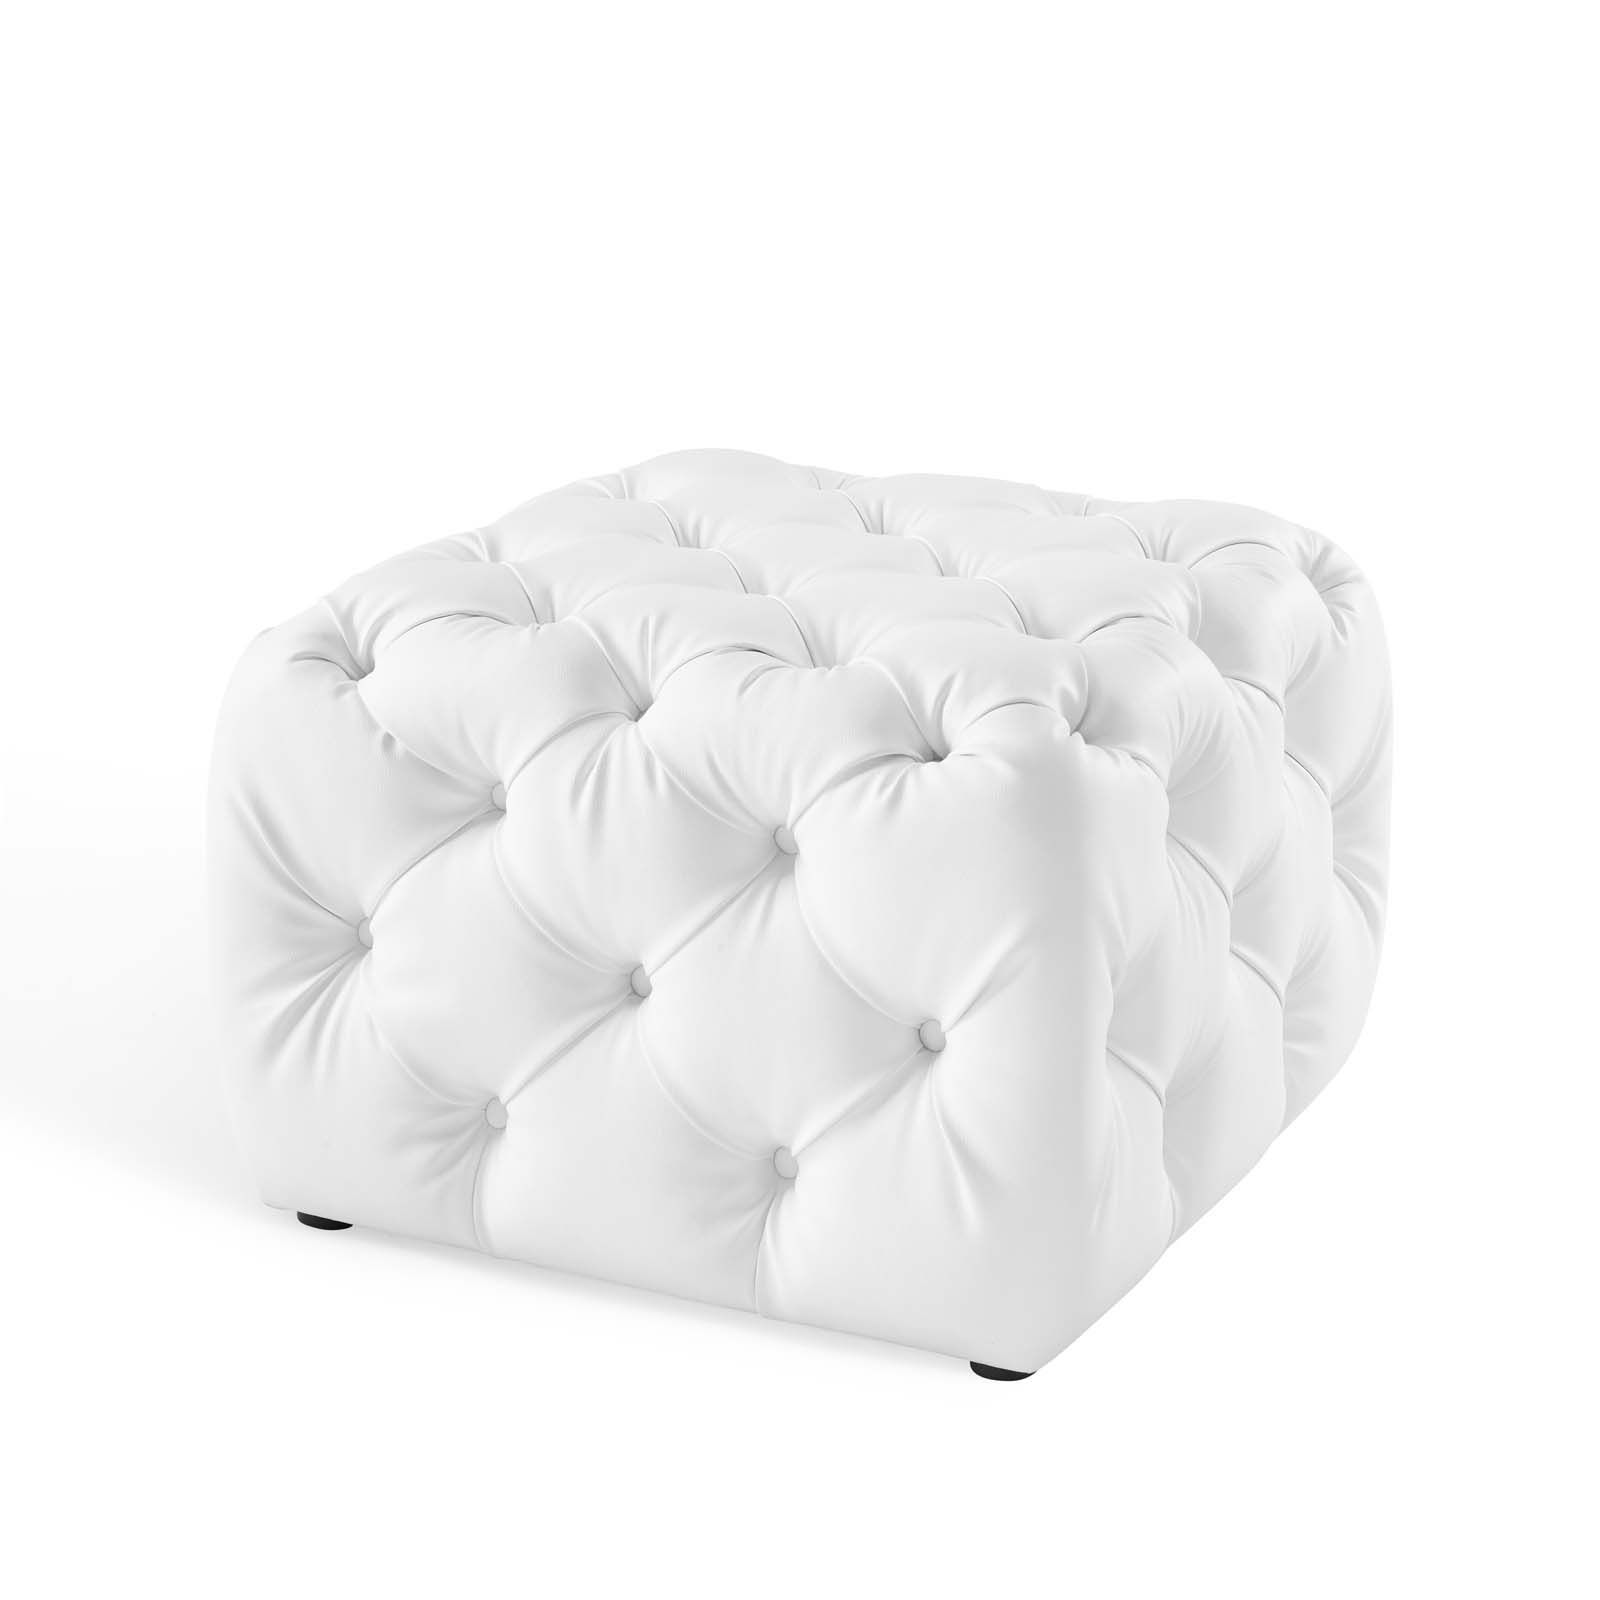 Preferred White And Blush Fabric Square Ottomans Throughout Anthem Tufted Button Square Faux Leather Ottoman White (View 8 of 10)